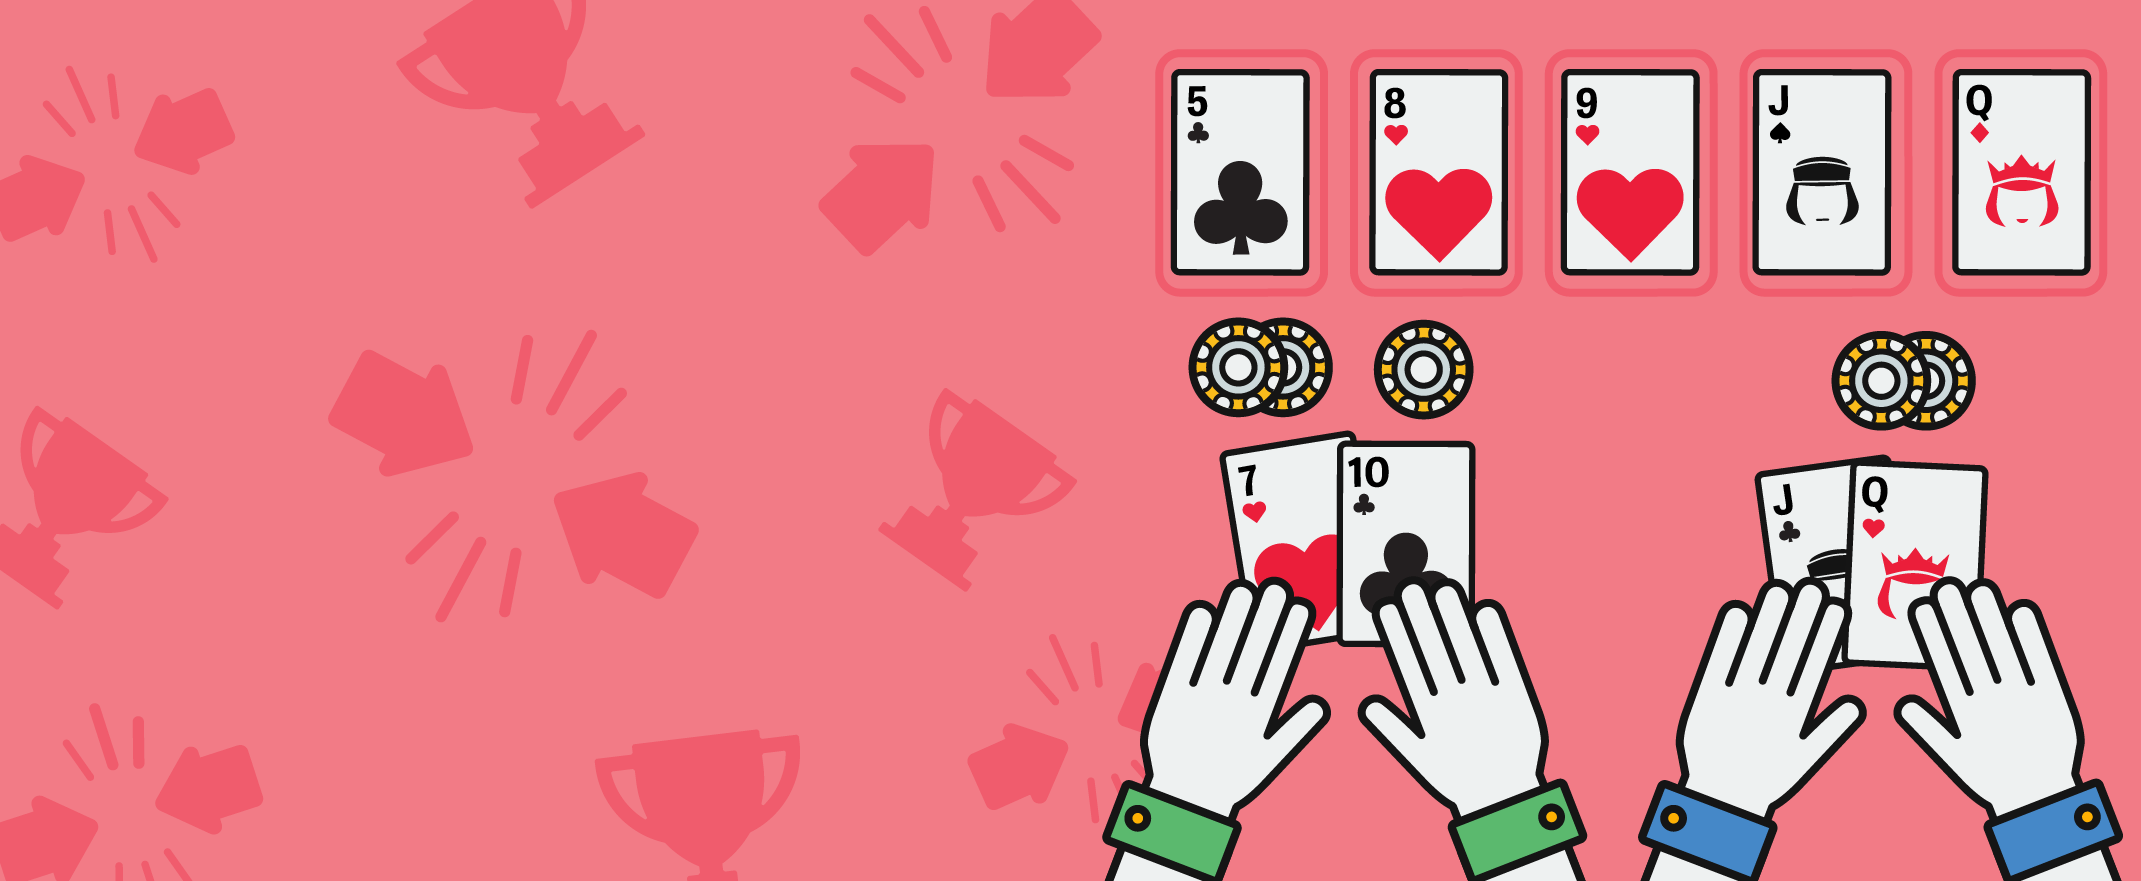 How to play poker guide - Understanding the Showdown